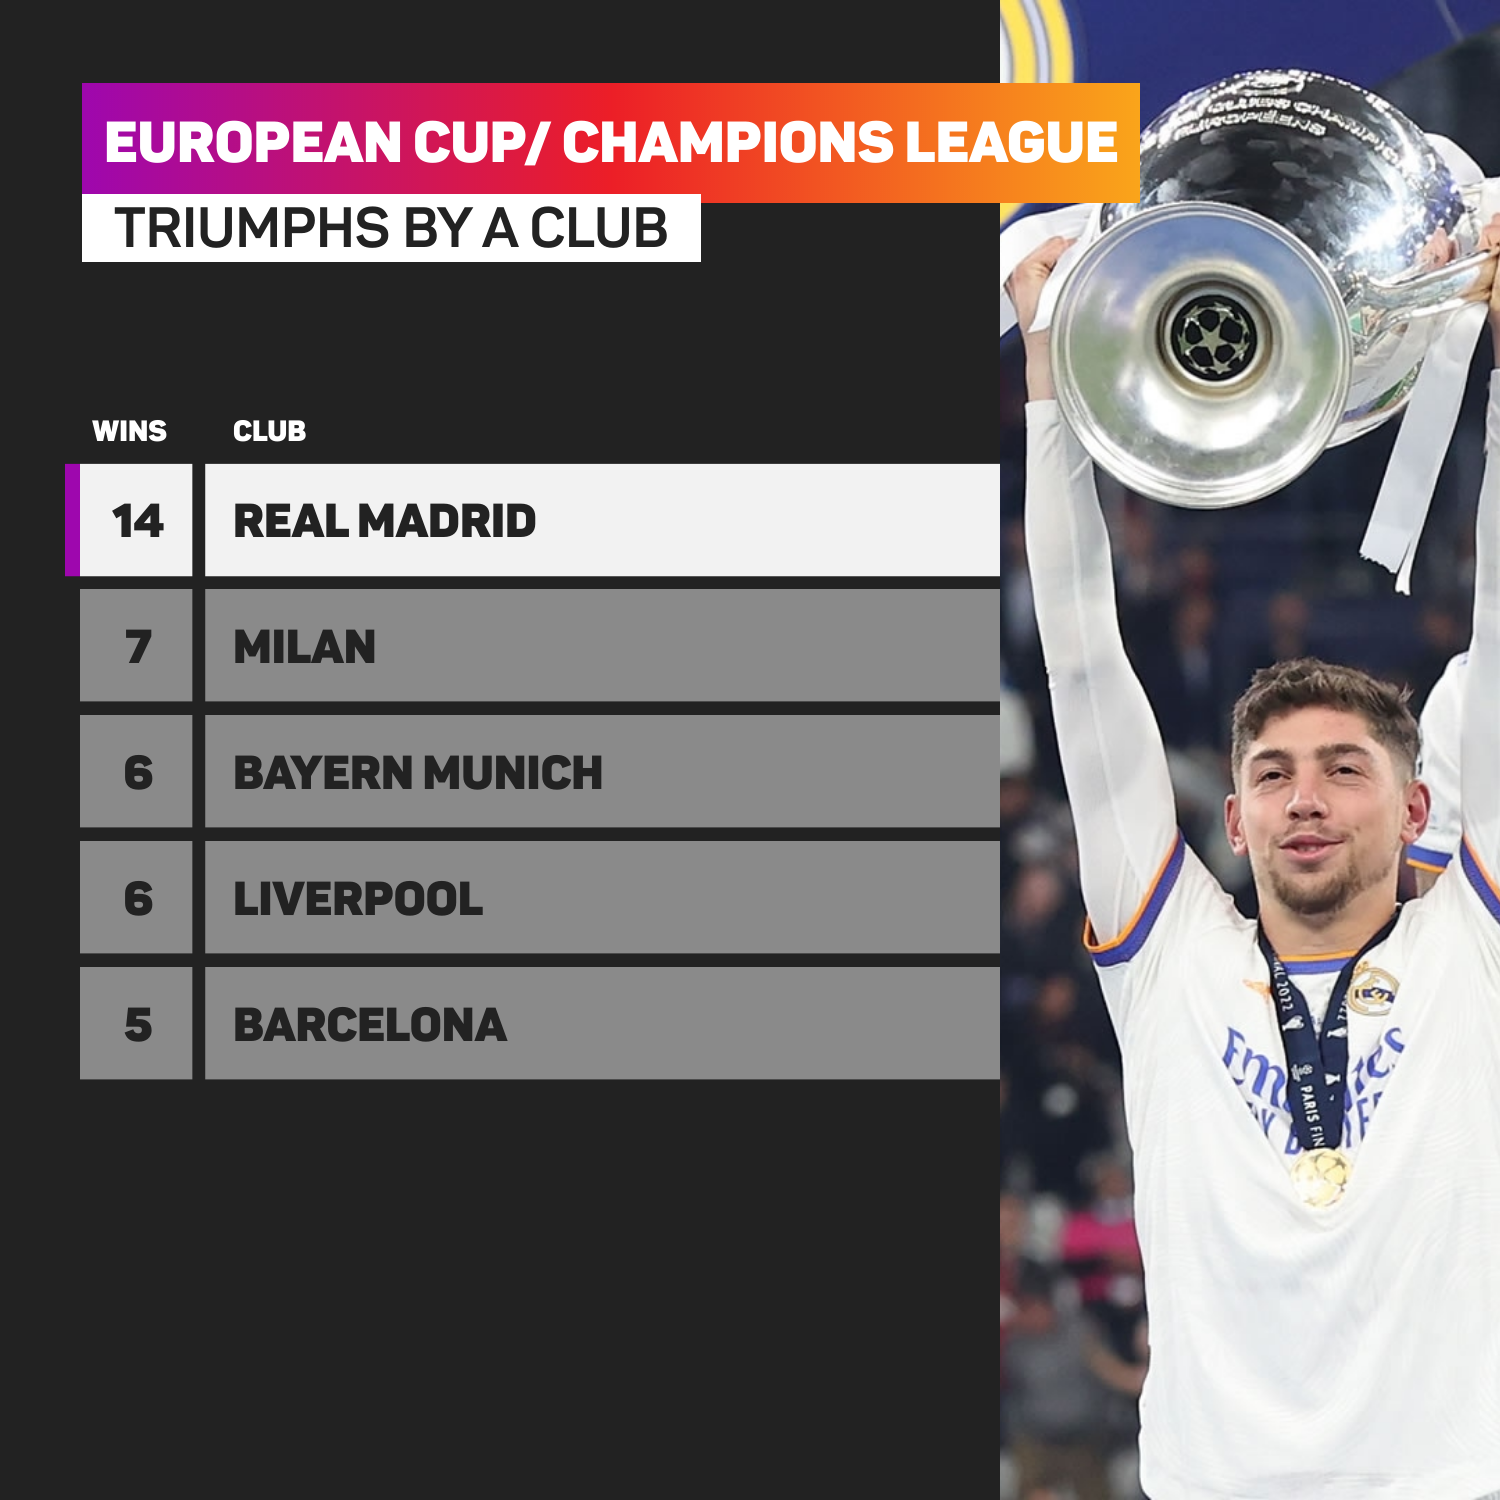 Real Madrid have won 14 European Cups/ Champions Leagues